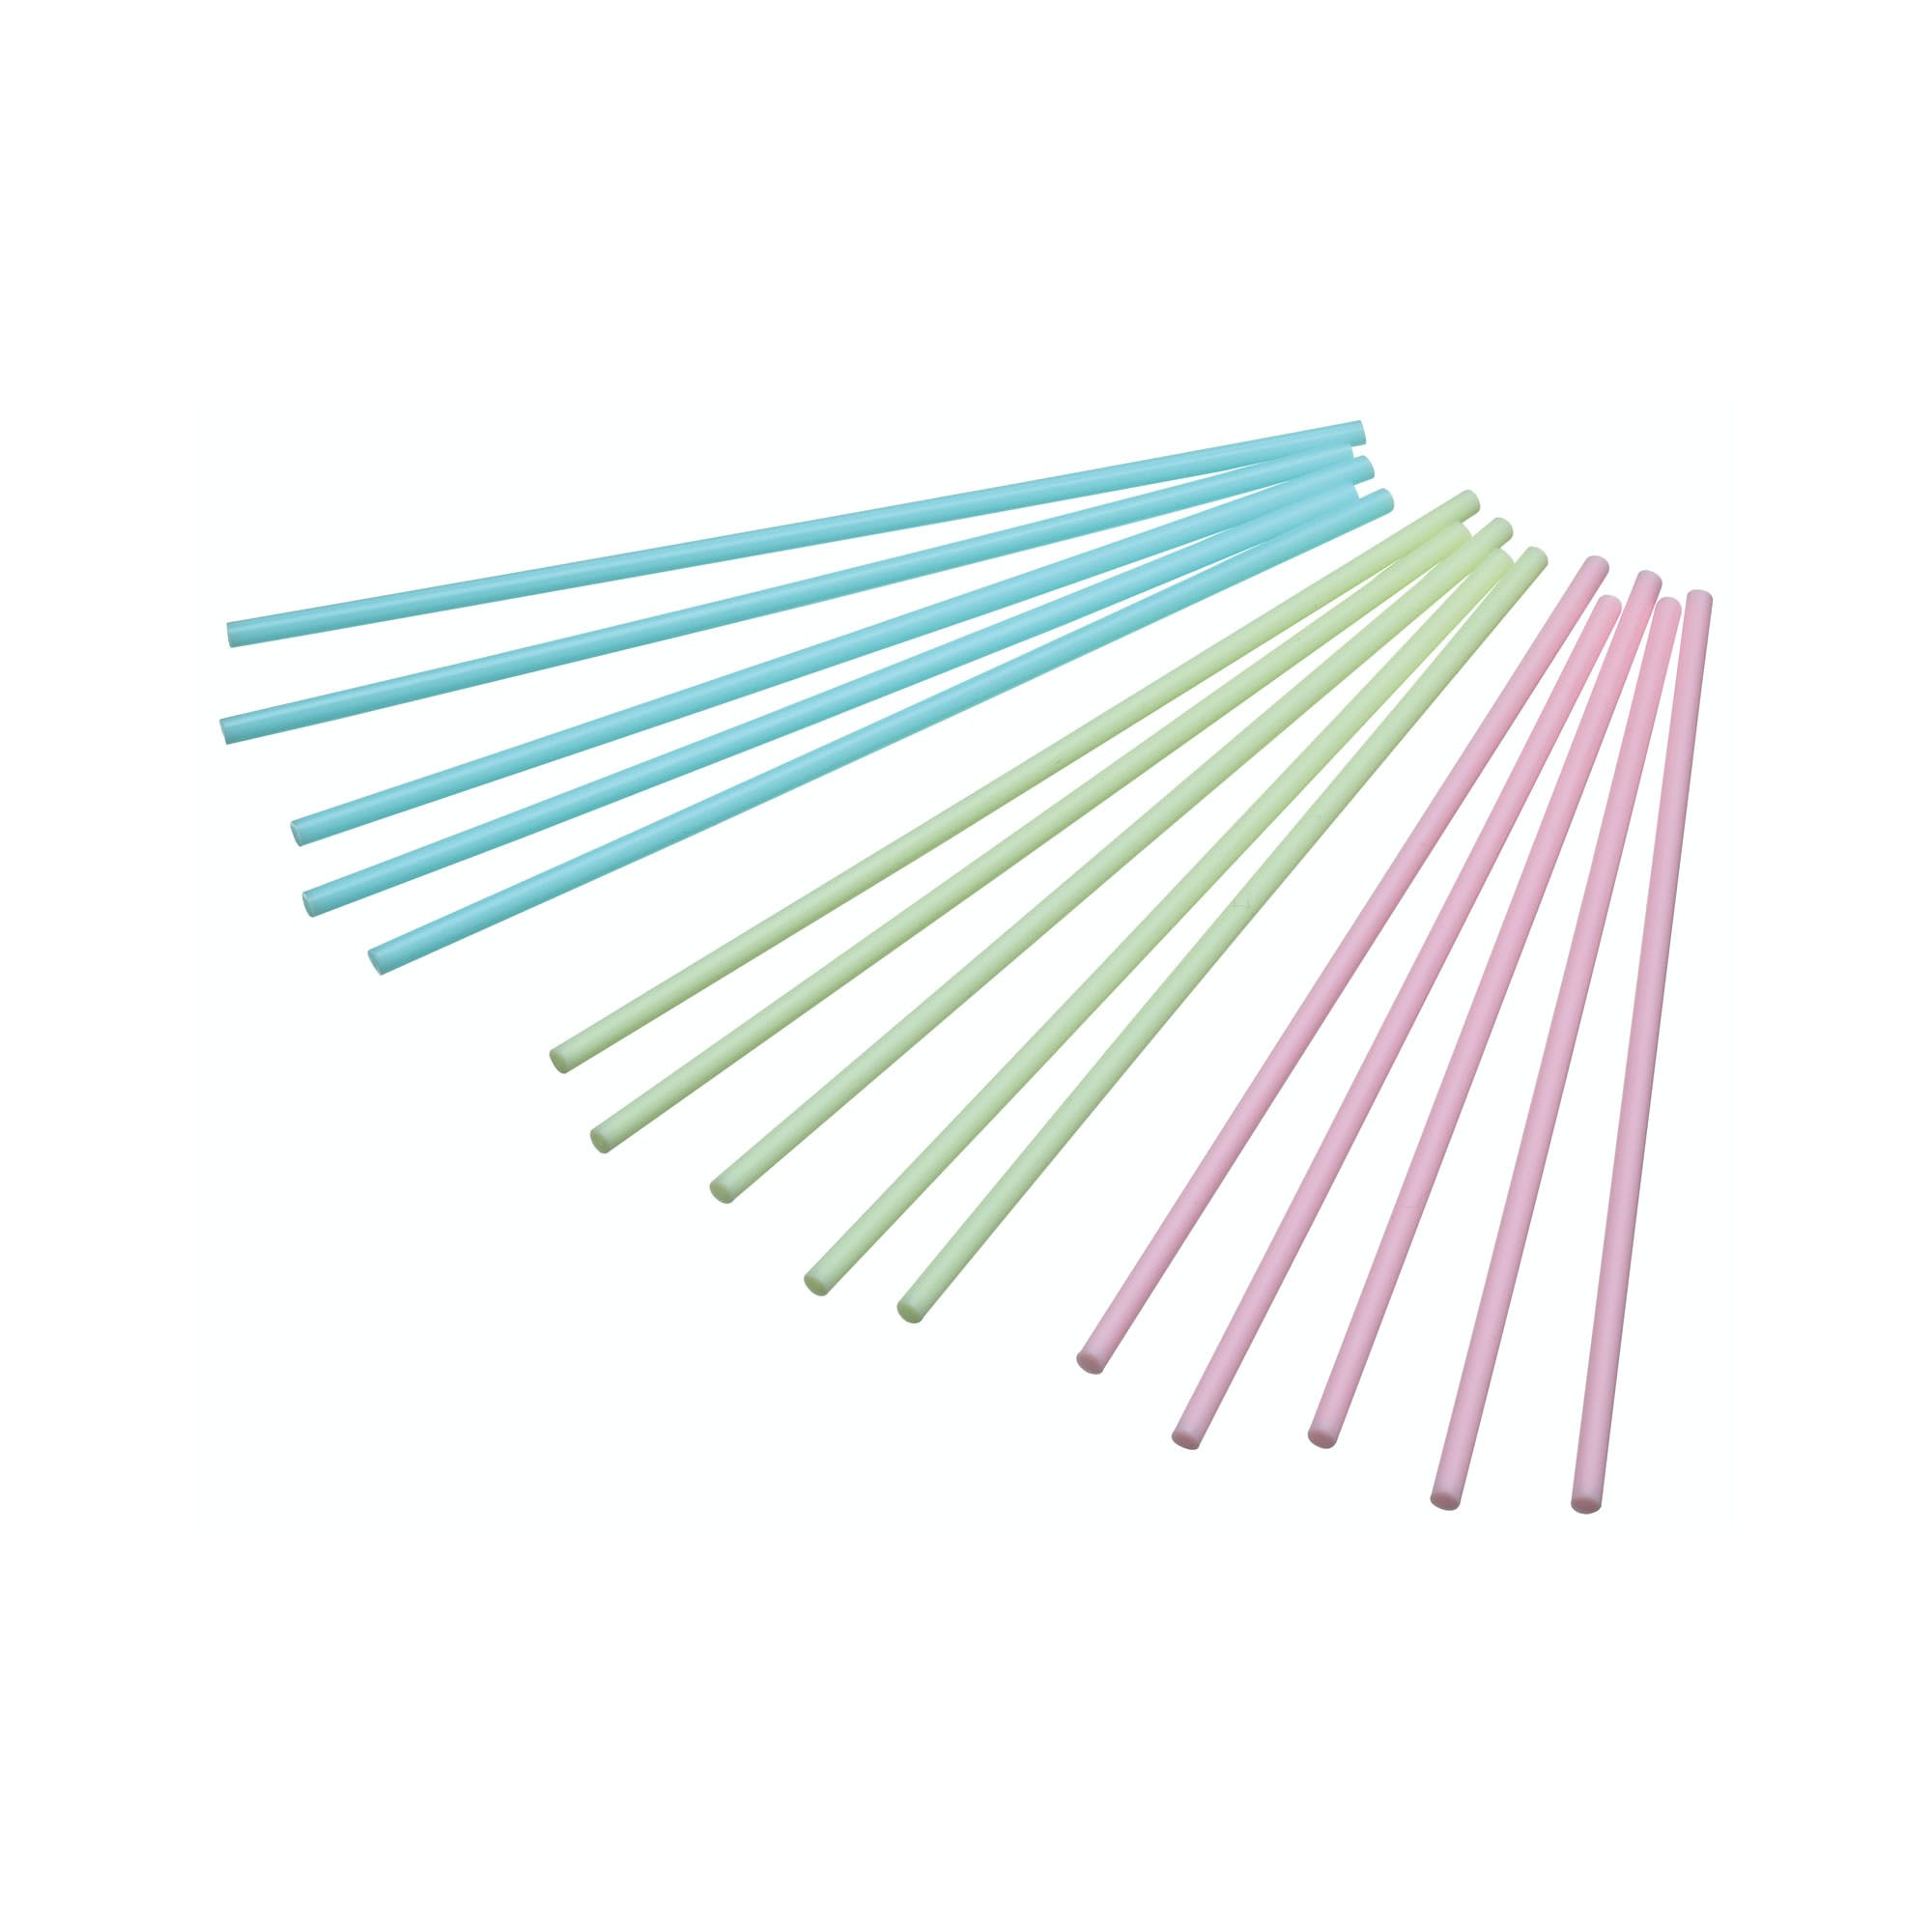 Sweetly Does It Pack of 60 Plastic Pastel Coloured Cake Pop Sticks - 15cm - The Cooks Cupboard Ltd